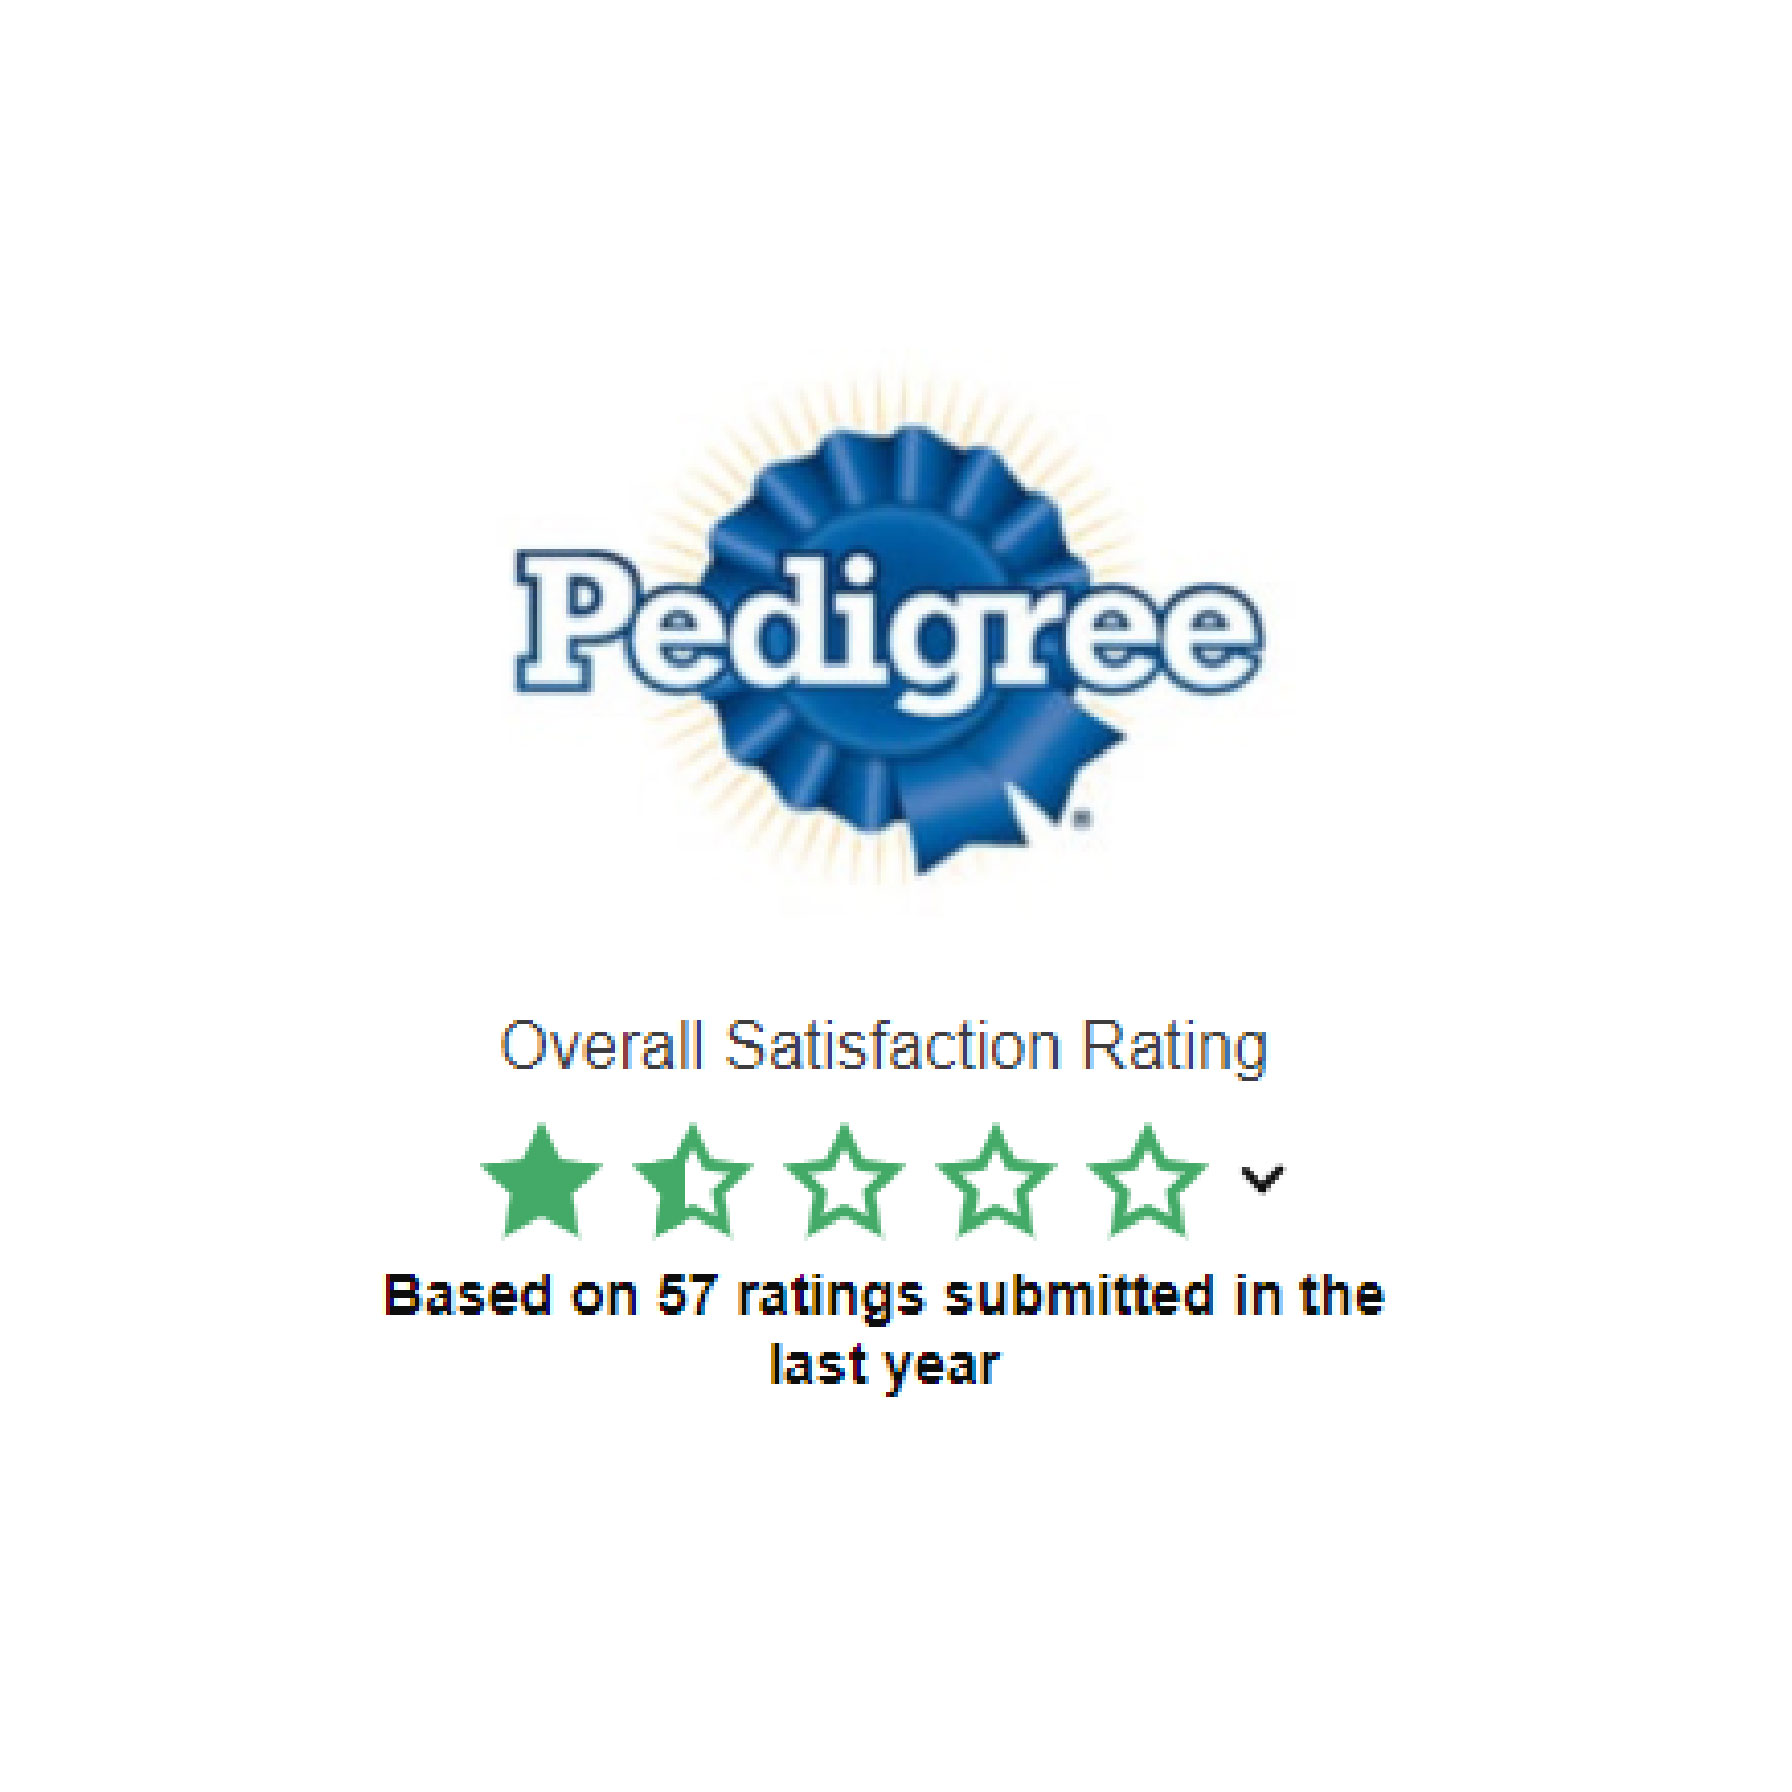 Consumer Reviews for Pedigree Pet Food - Risks of Commercial Pet Foods for Dogs & Cats